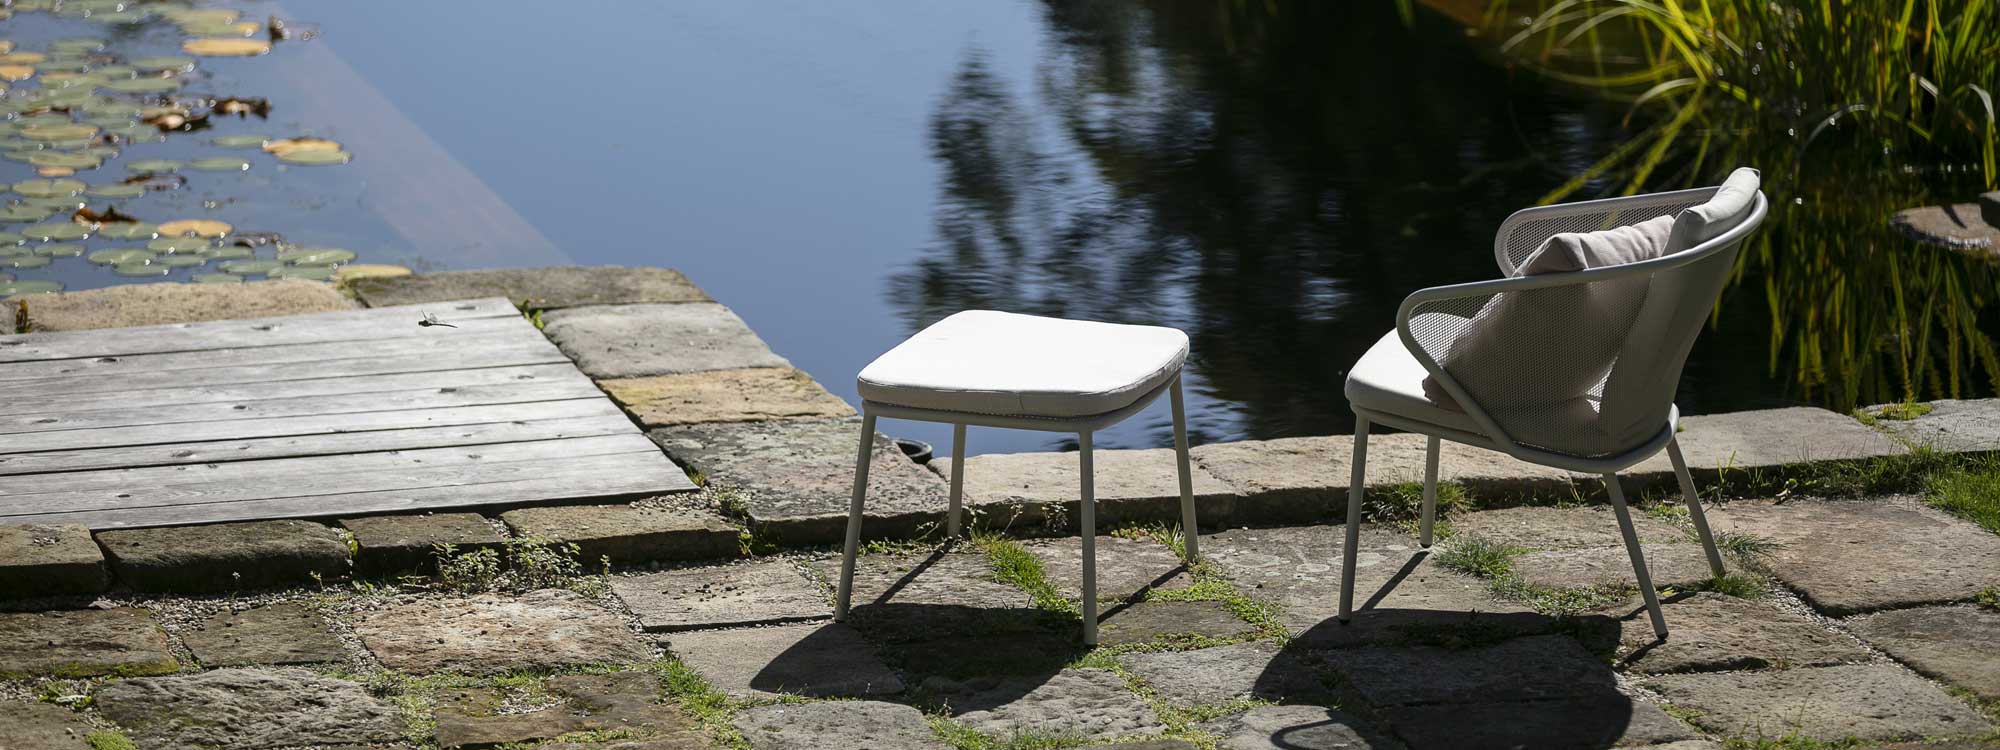 Image of white Condor contemporary garden chair and footstool on stone floor by water feature